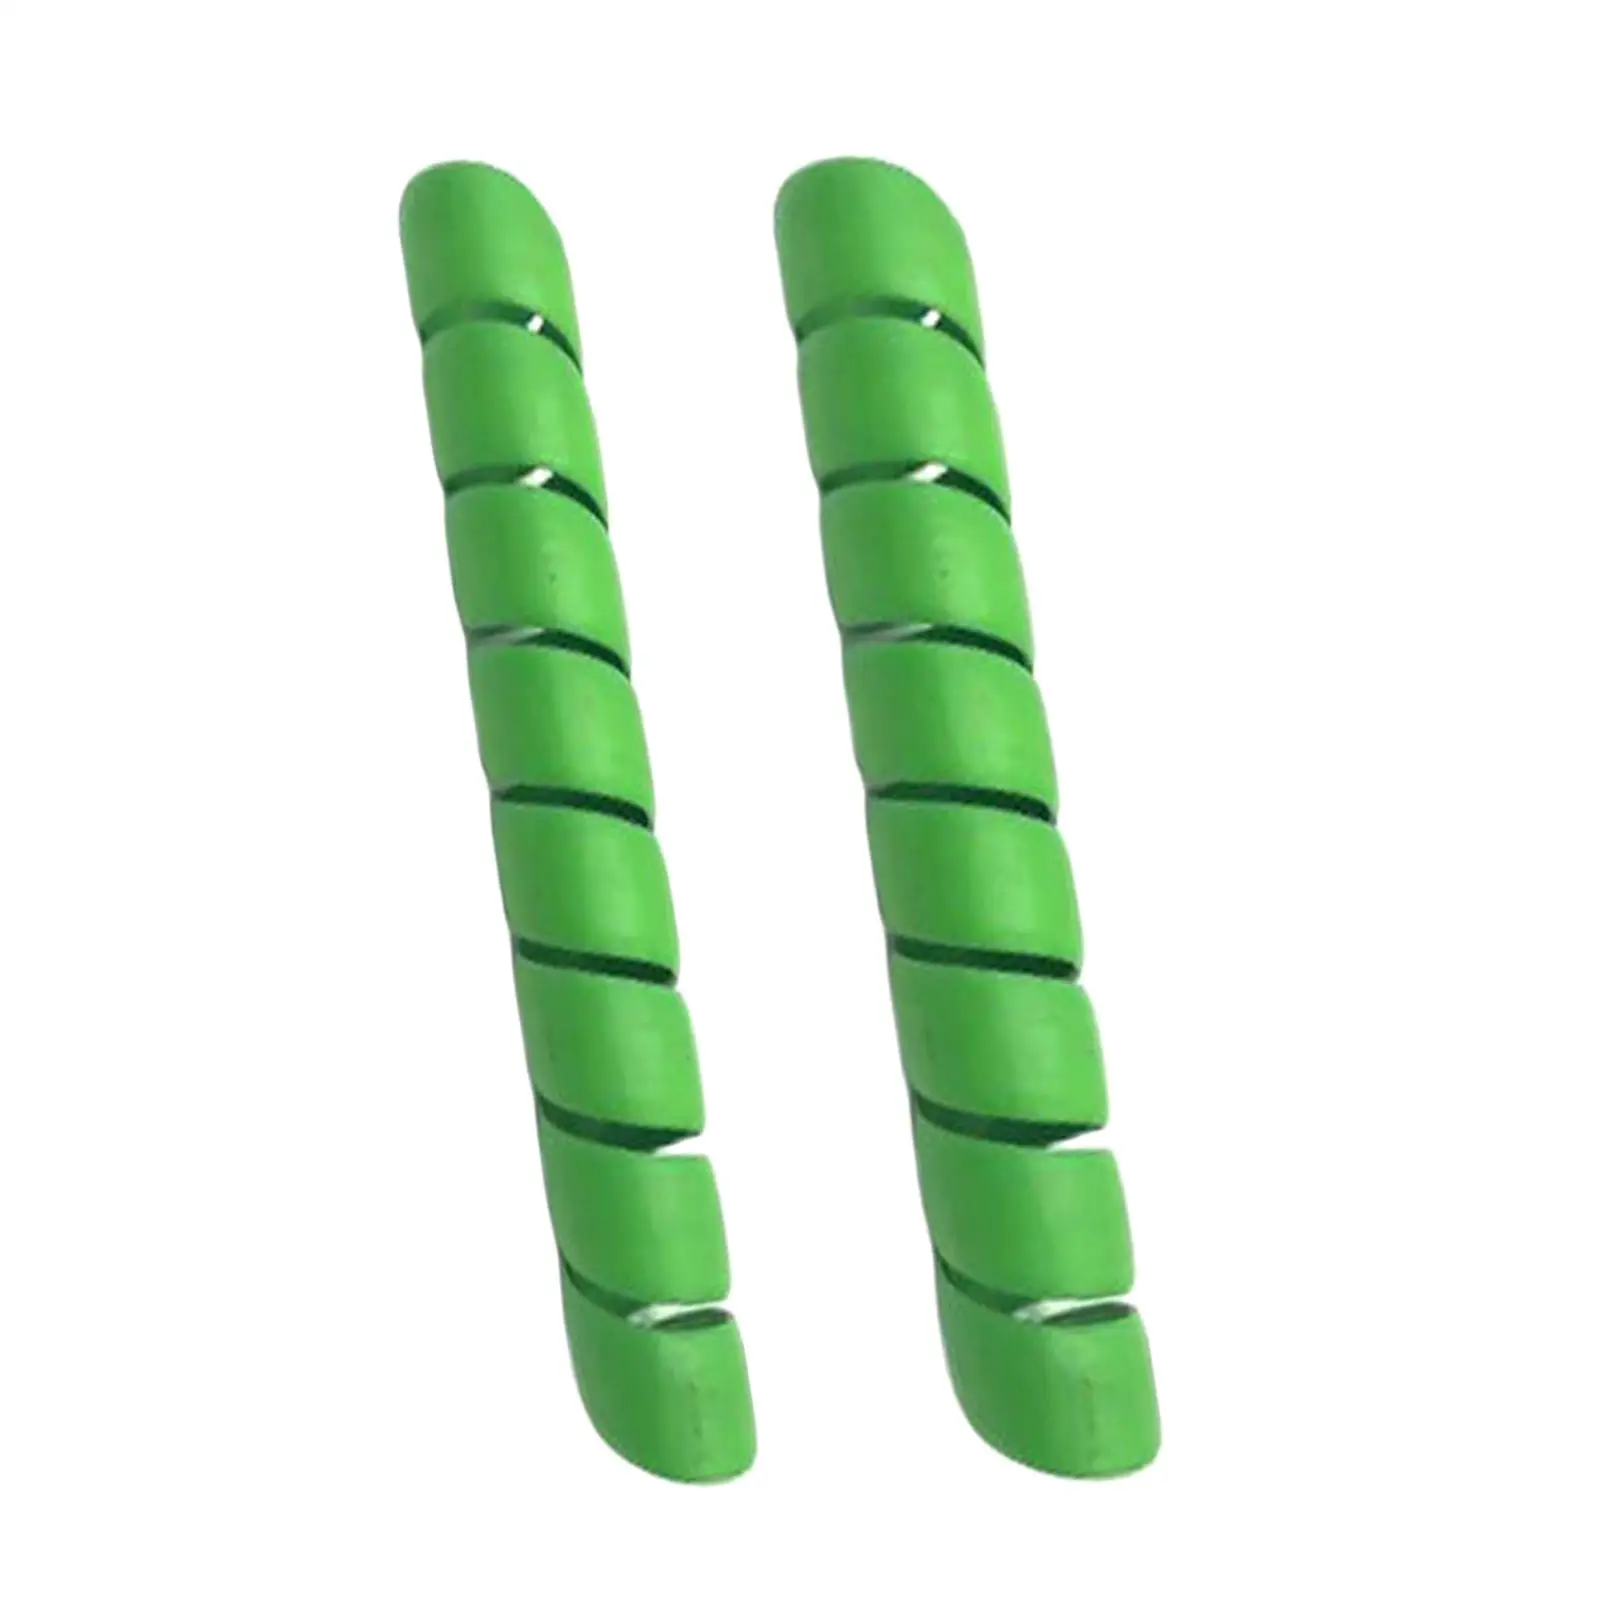 

2Pcs Tree Trunk Protector Sleeve Durable Anti Chewing Plants Guard Prevent Damage Flexible Tree Bark Protector Tree Wraps Green